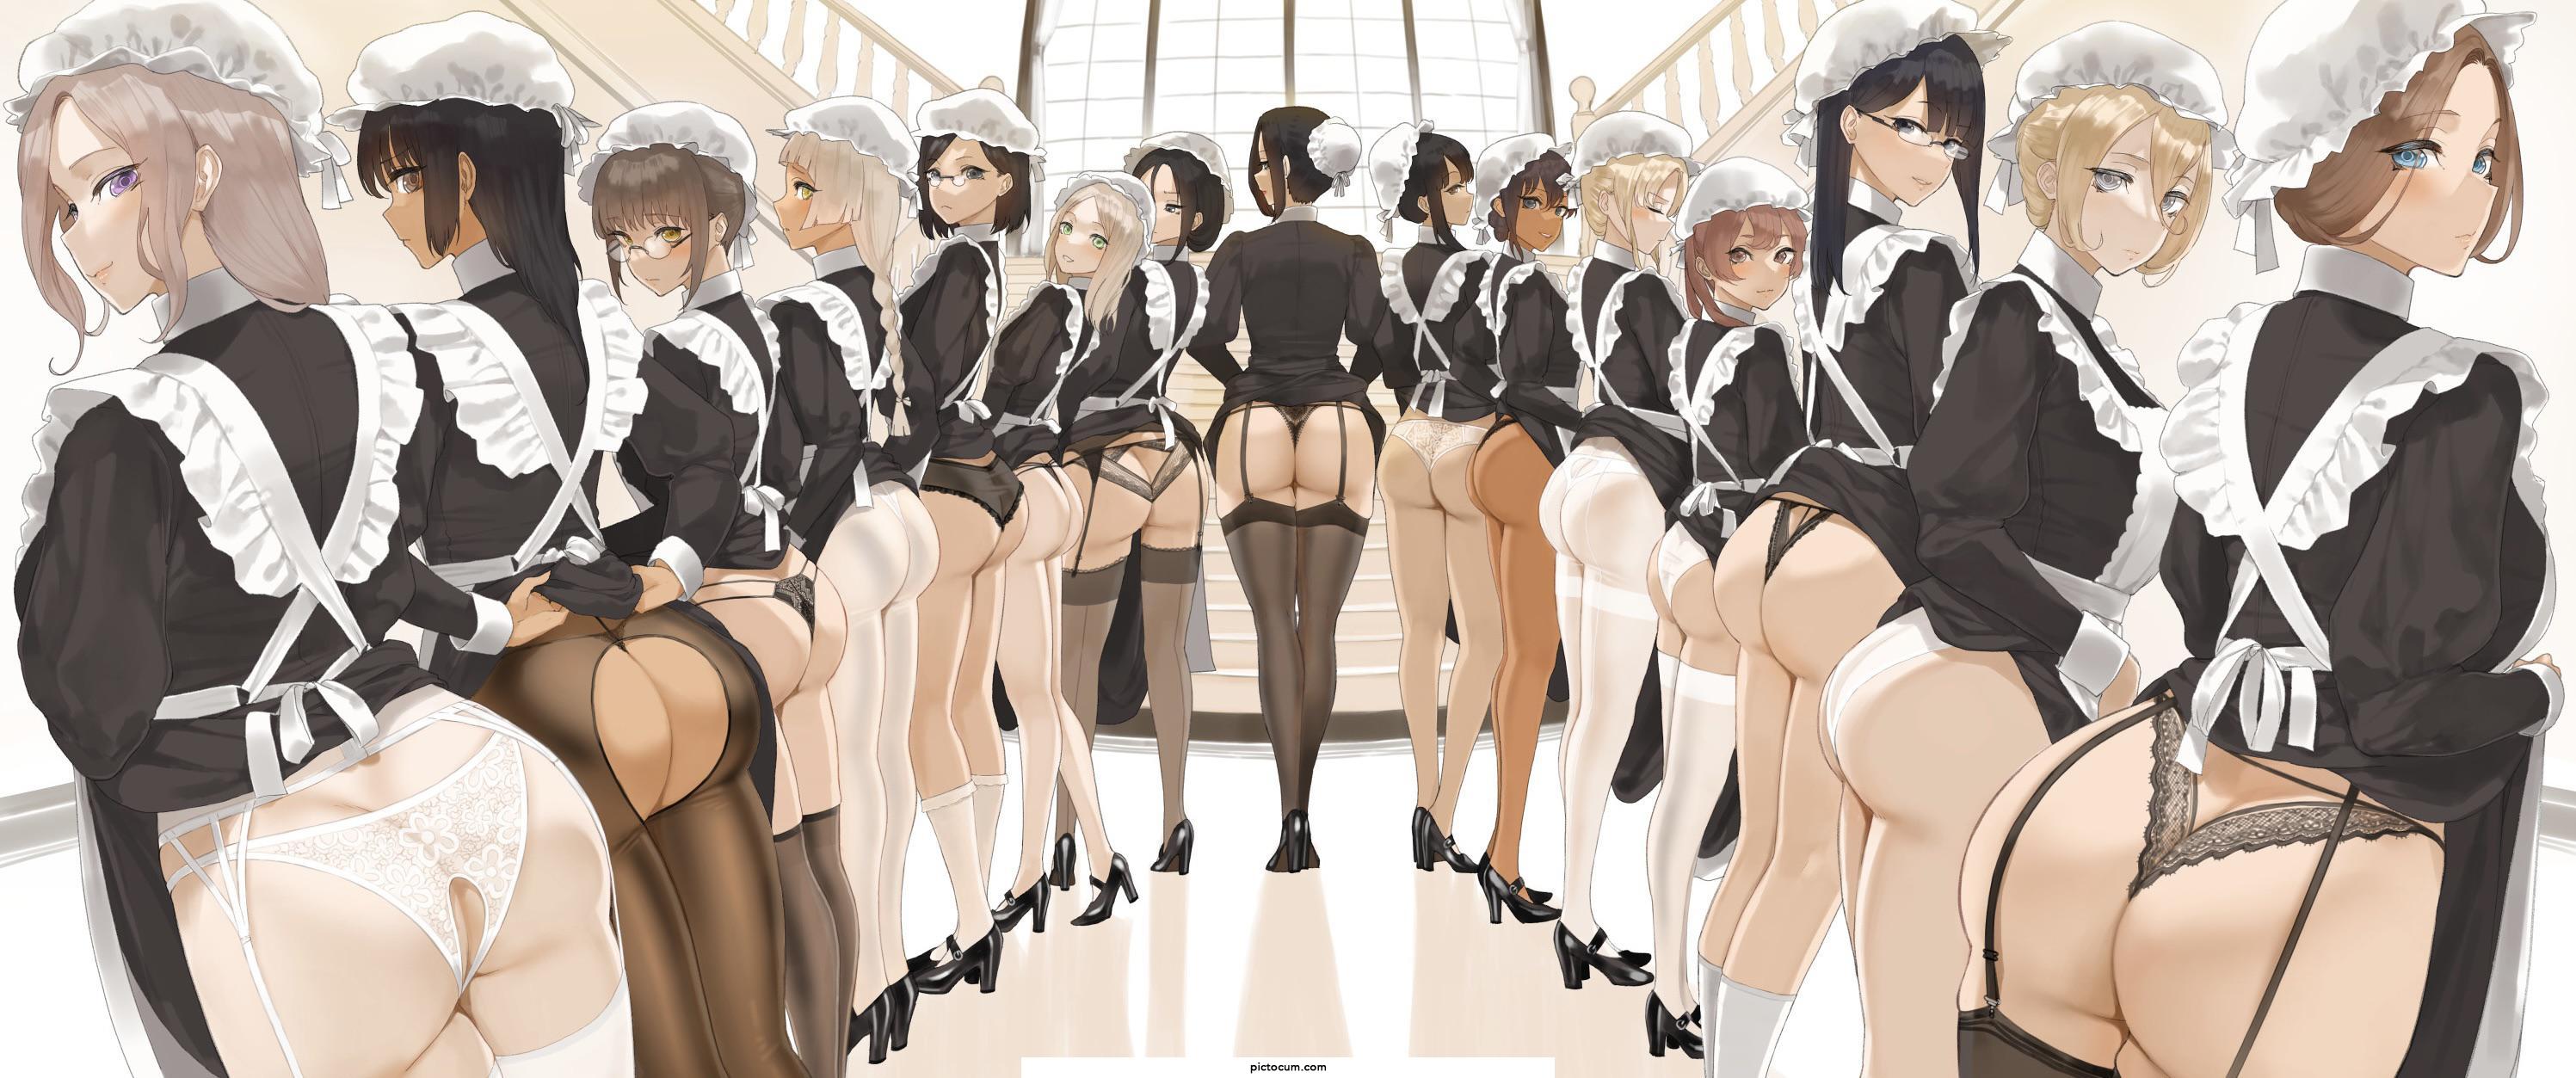 The maids are ready